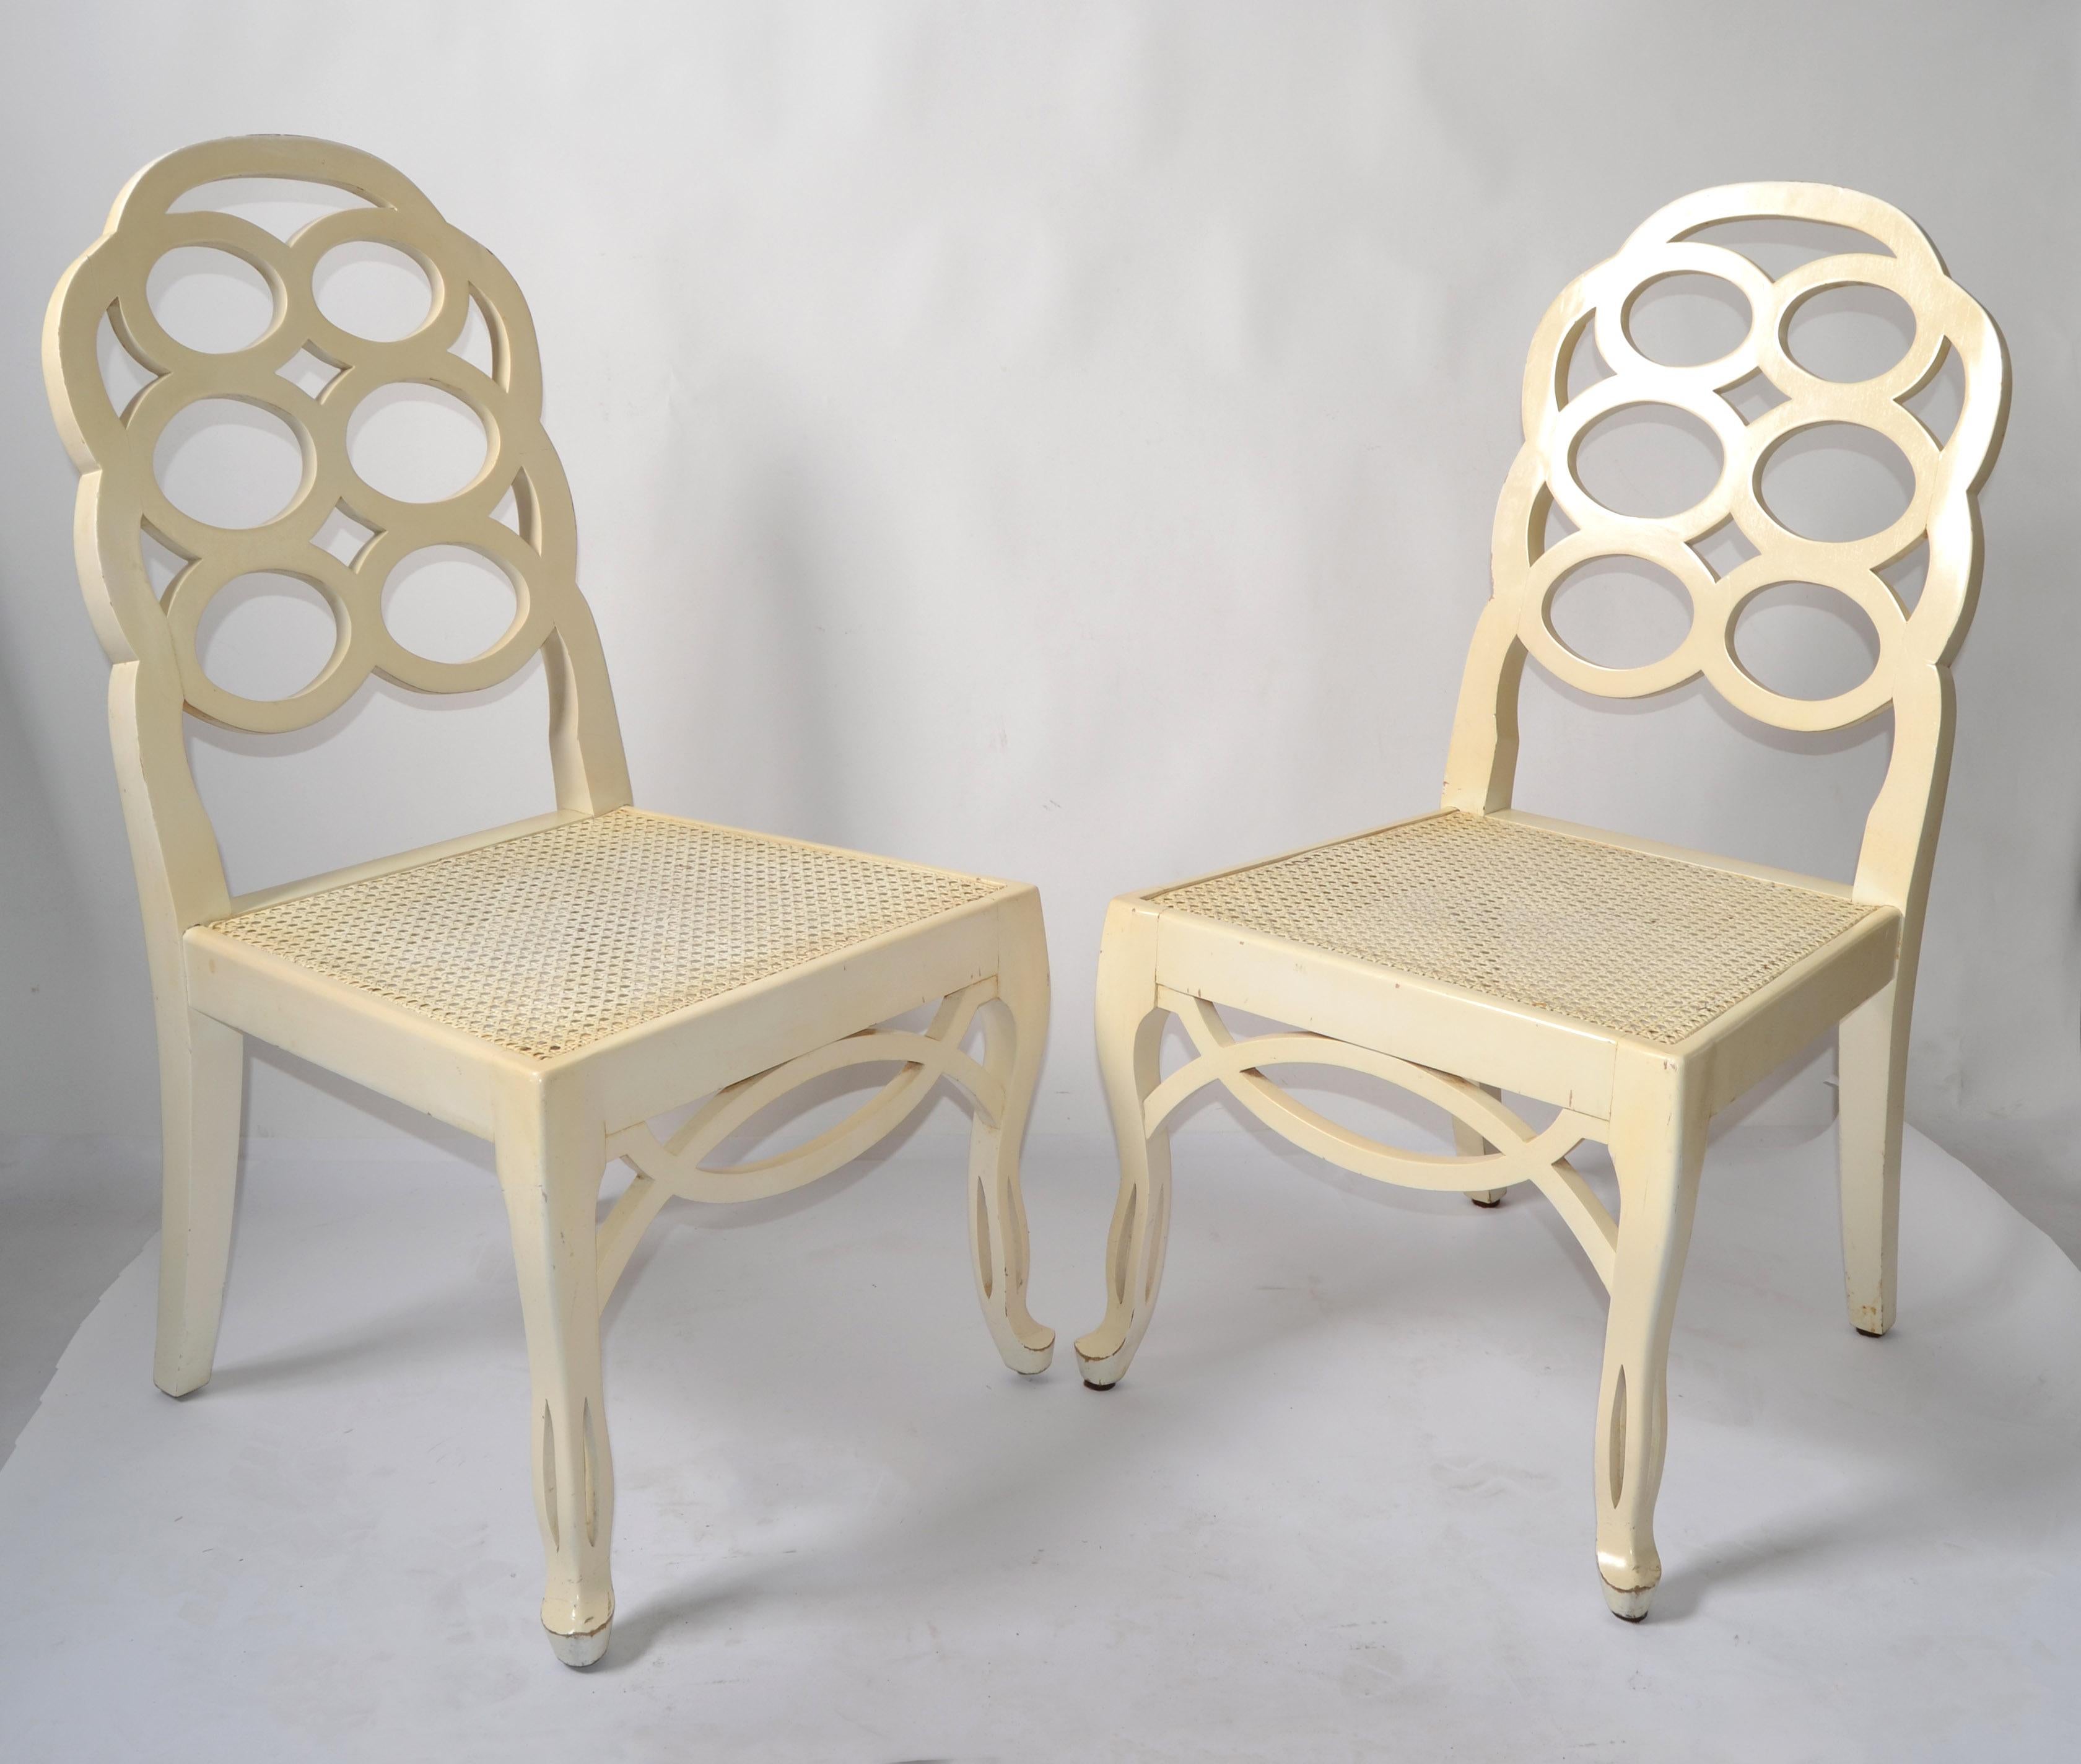 First Edition Pair of Loop Side or Dining Chairs designed by Frances Elkins and made in Spain circa 1965.
Regency Period with hand-carved legs, Apron Decoration and both are with the original handwoven caned seat.
The original beige lacquer finish